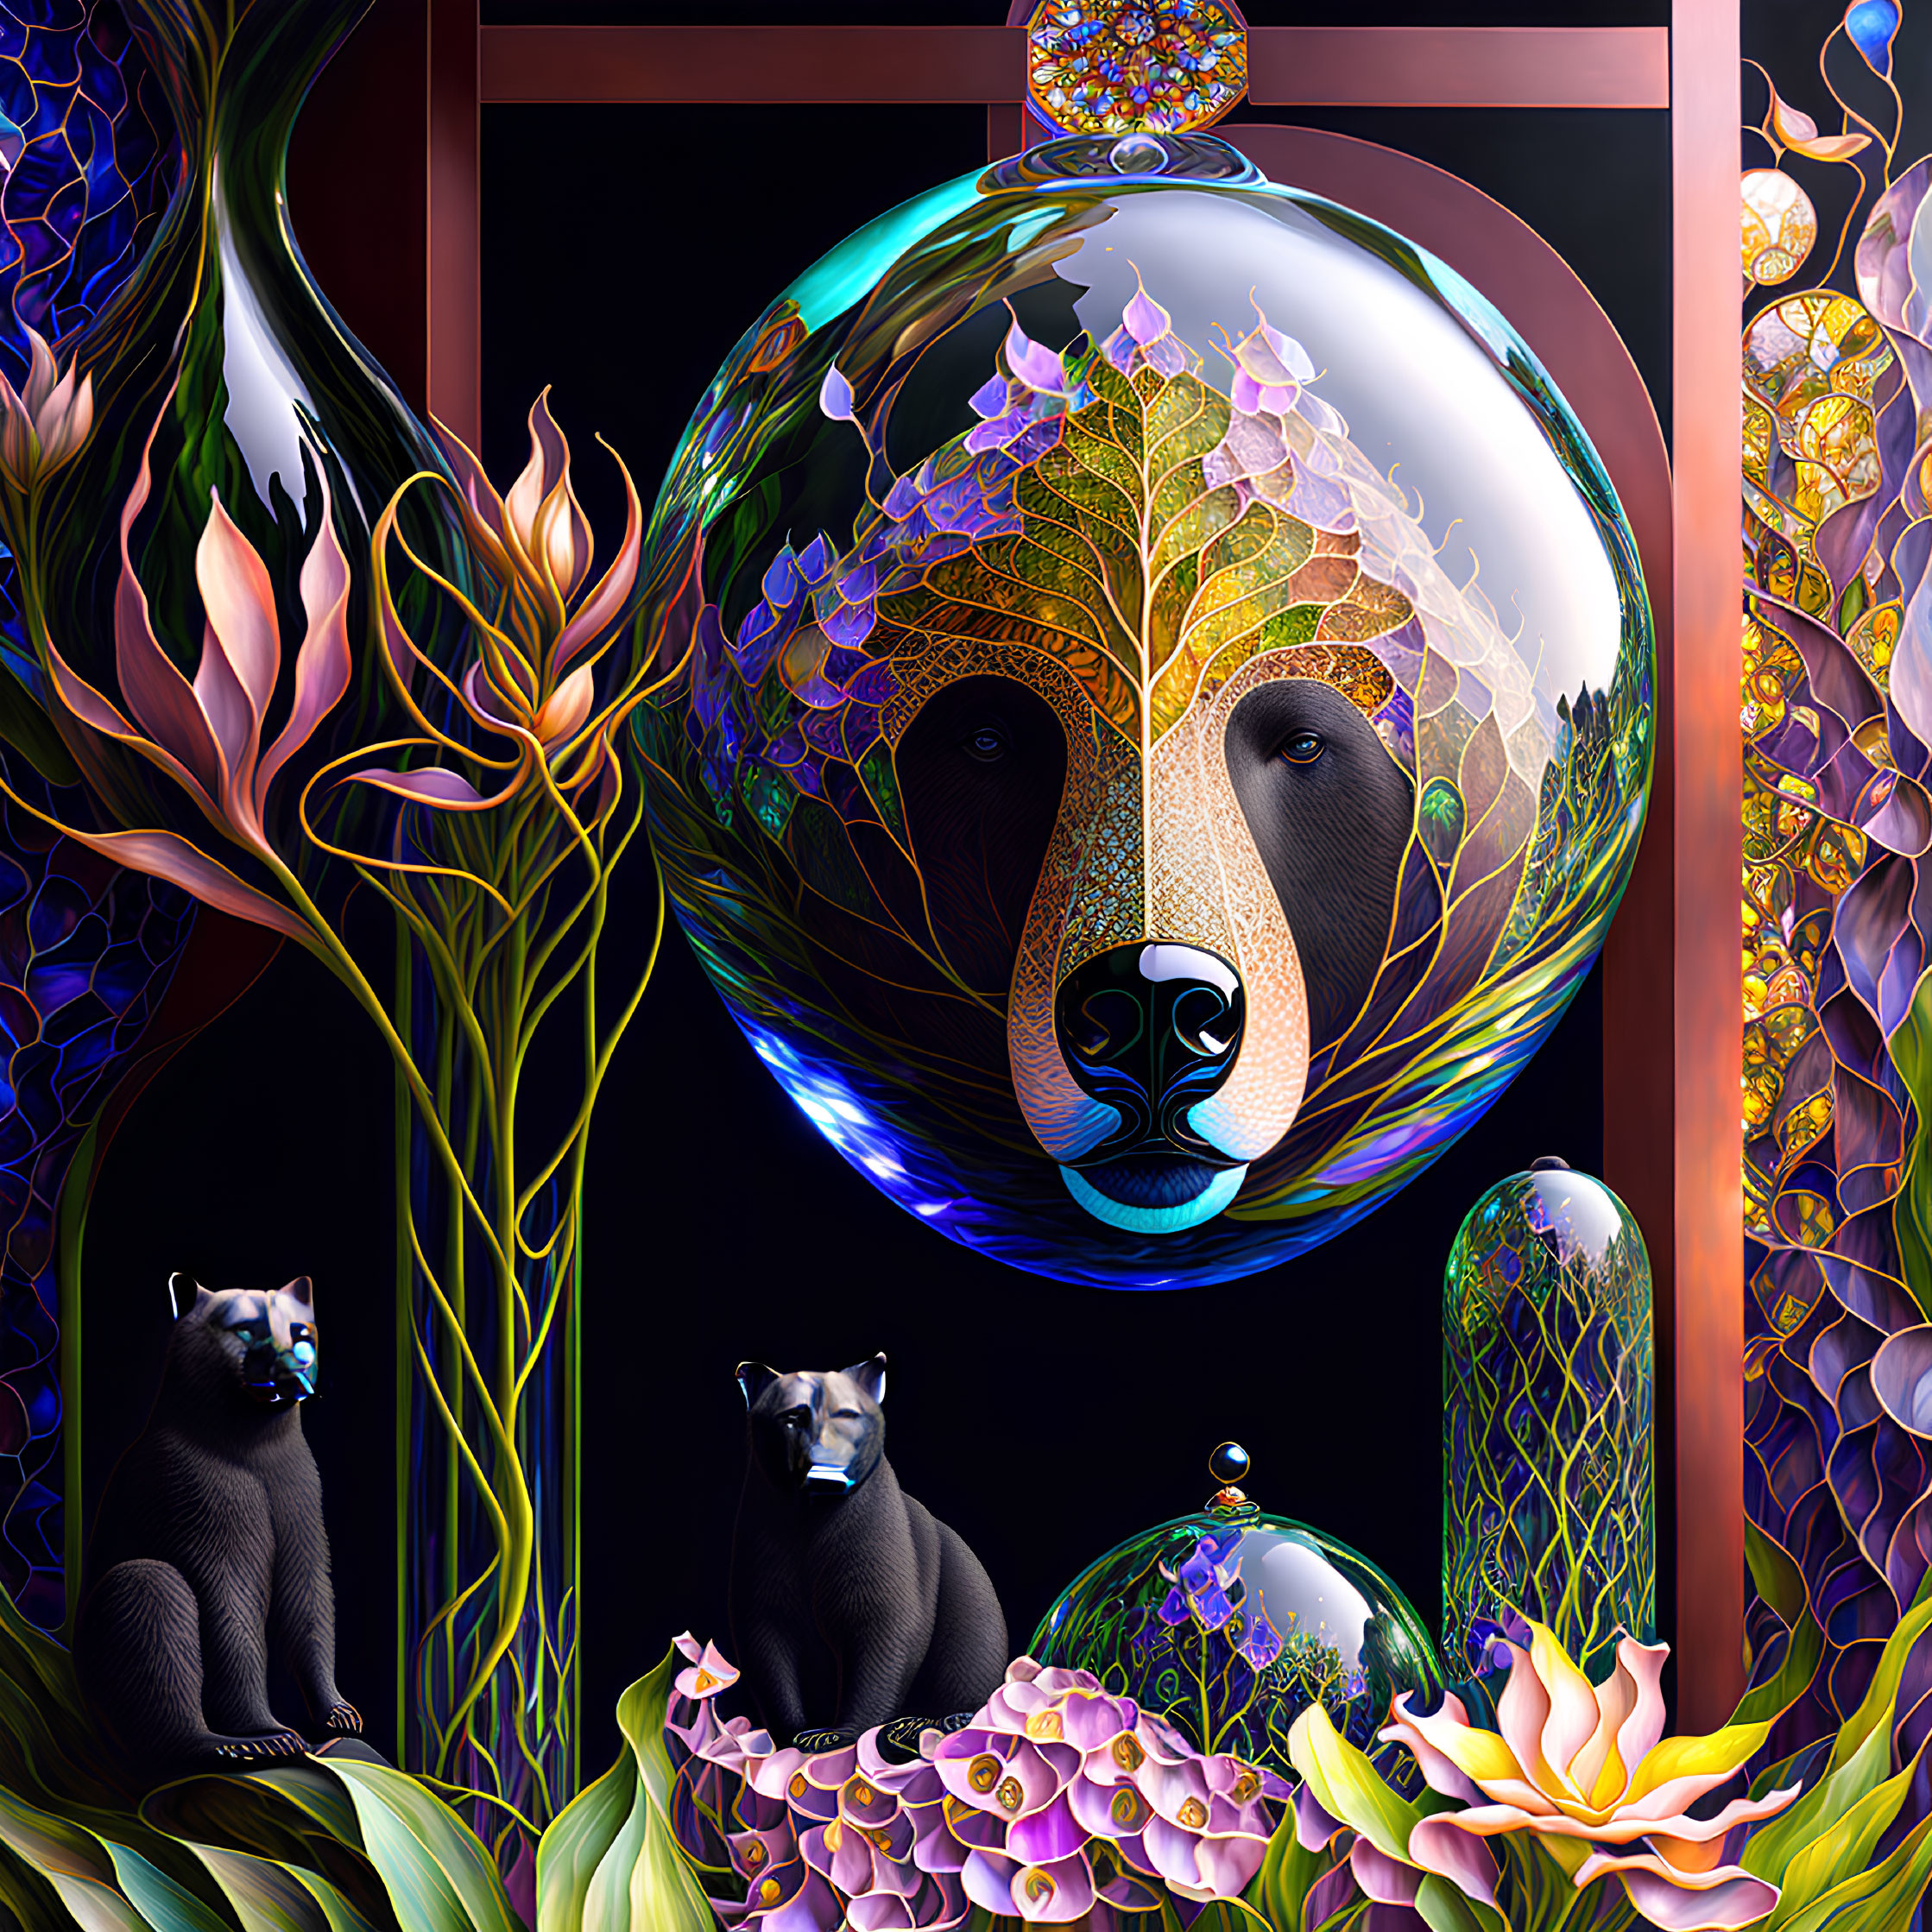 Digital artwork: Transparent orb with leaf-patterned bear face, flanked by panthers, flowers,